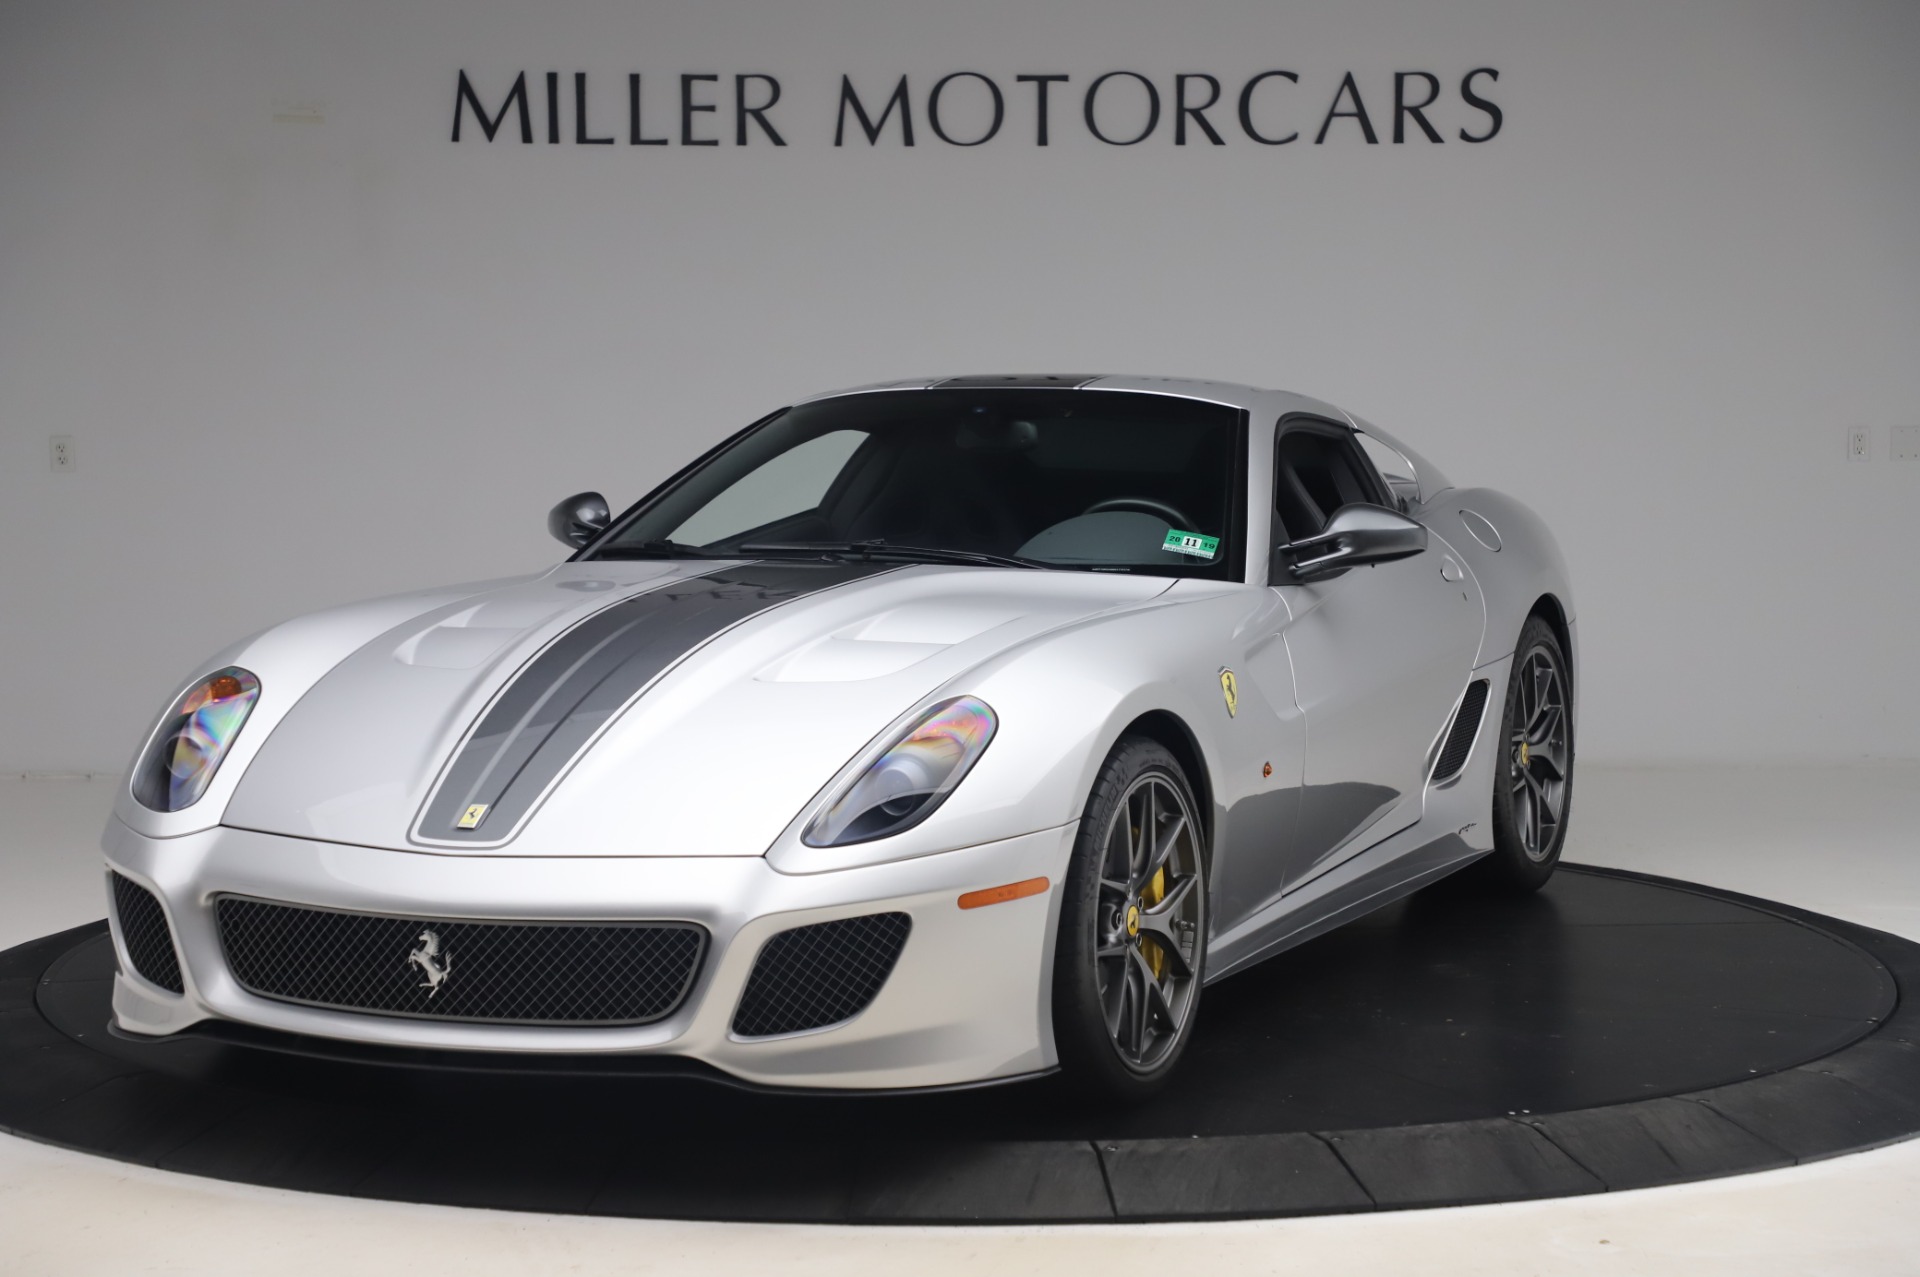 Used 2011 Ferrari 599 GTO for sale Sold at Bentley Greenwich in Greenwich CT 06830 1